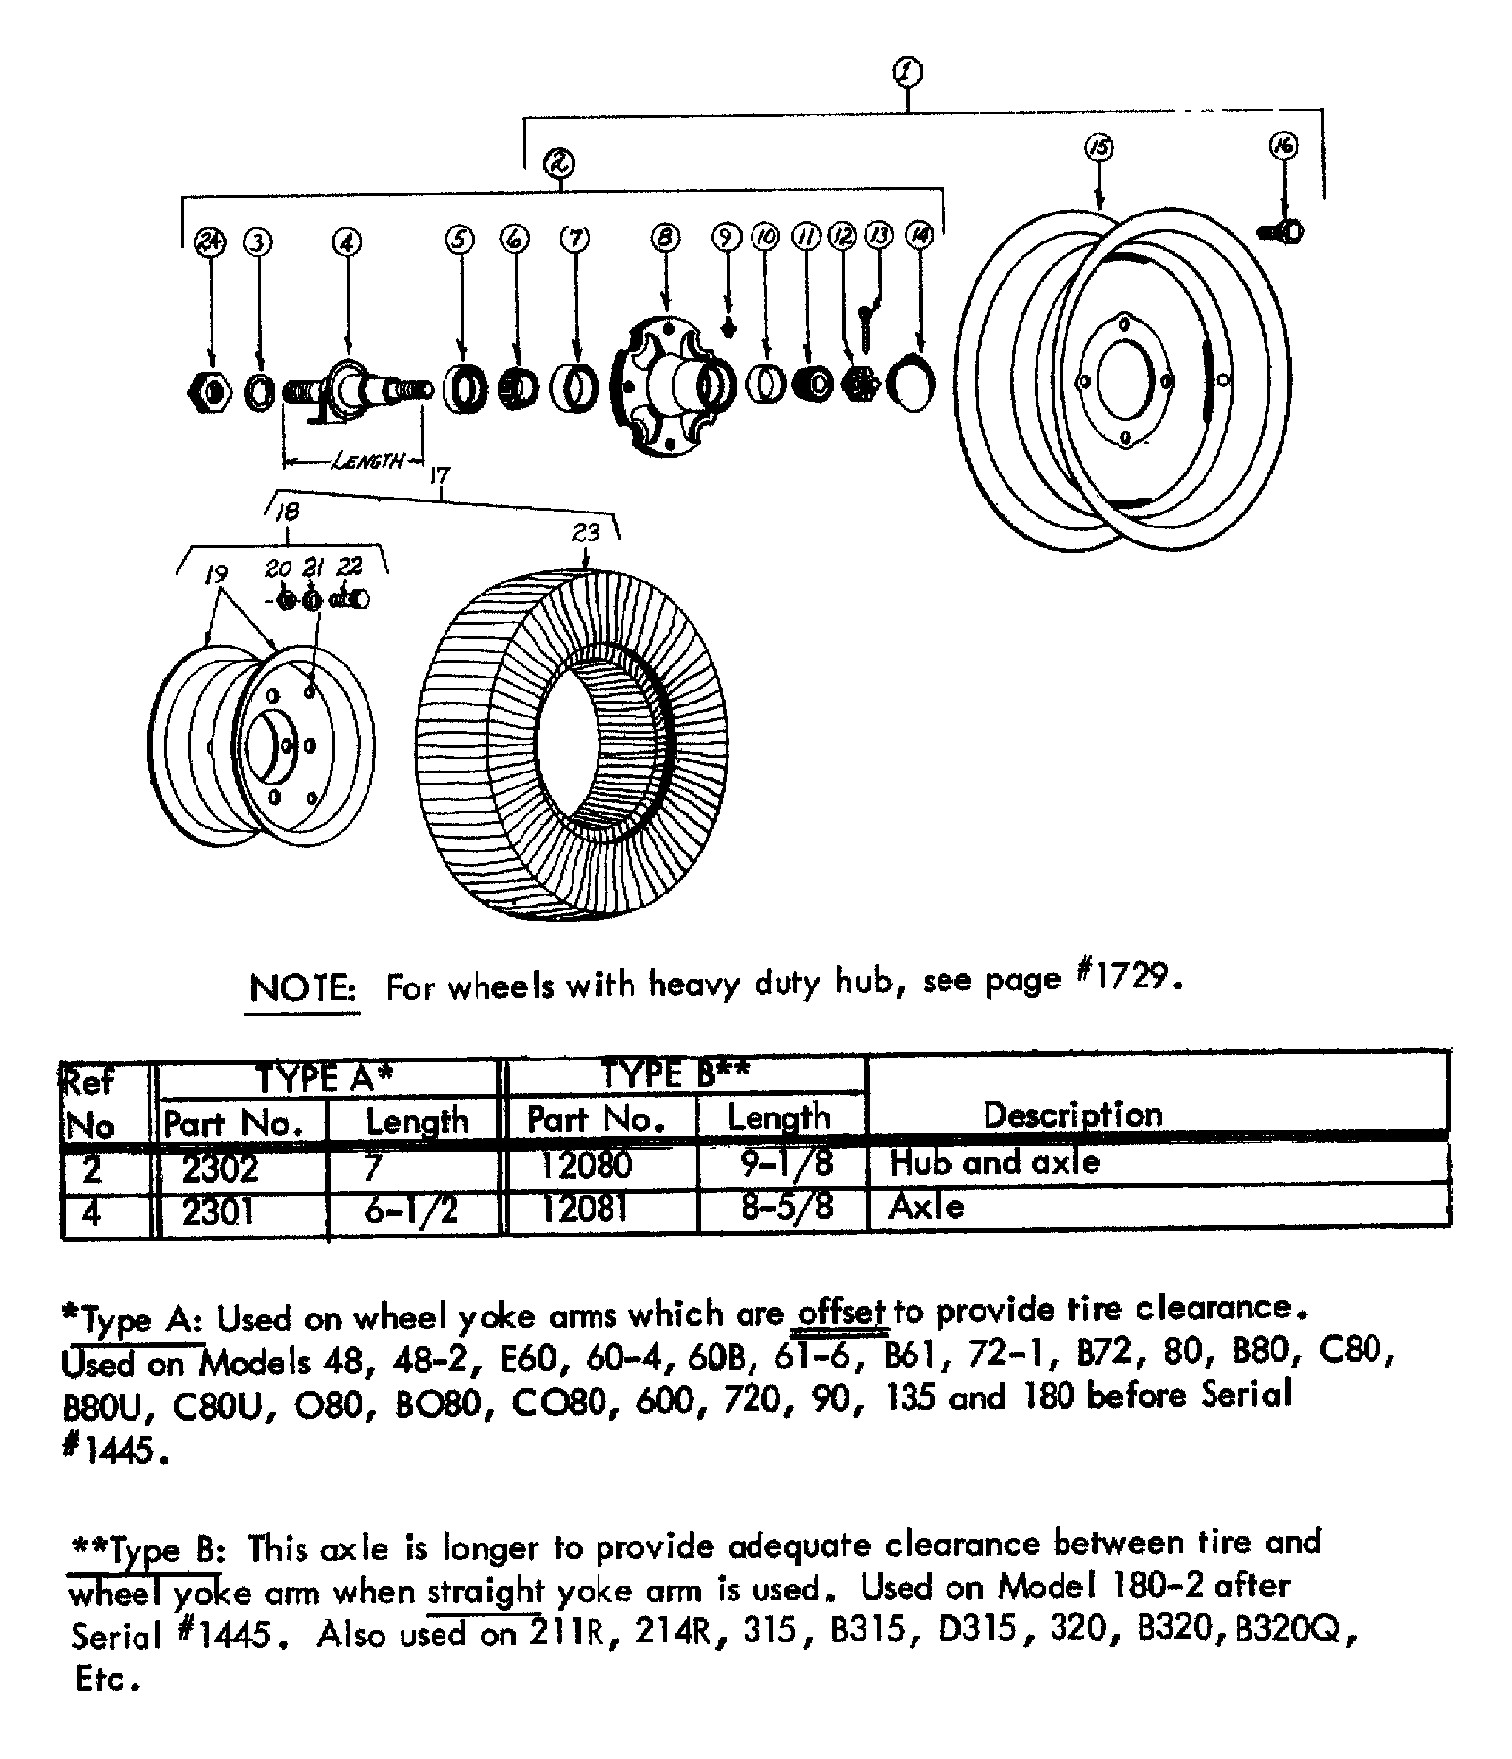 Trailer Axle Bearing Diagram Woods D210r 1 Batwing Rotary Cutter Wheels 14 Inch & 15 Inch Of Trailer Axle Bearing Diagram